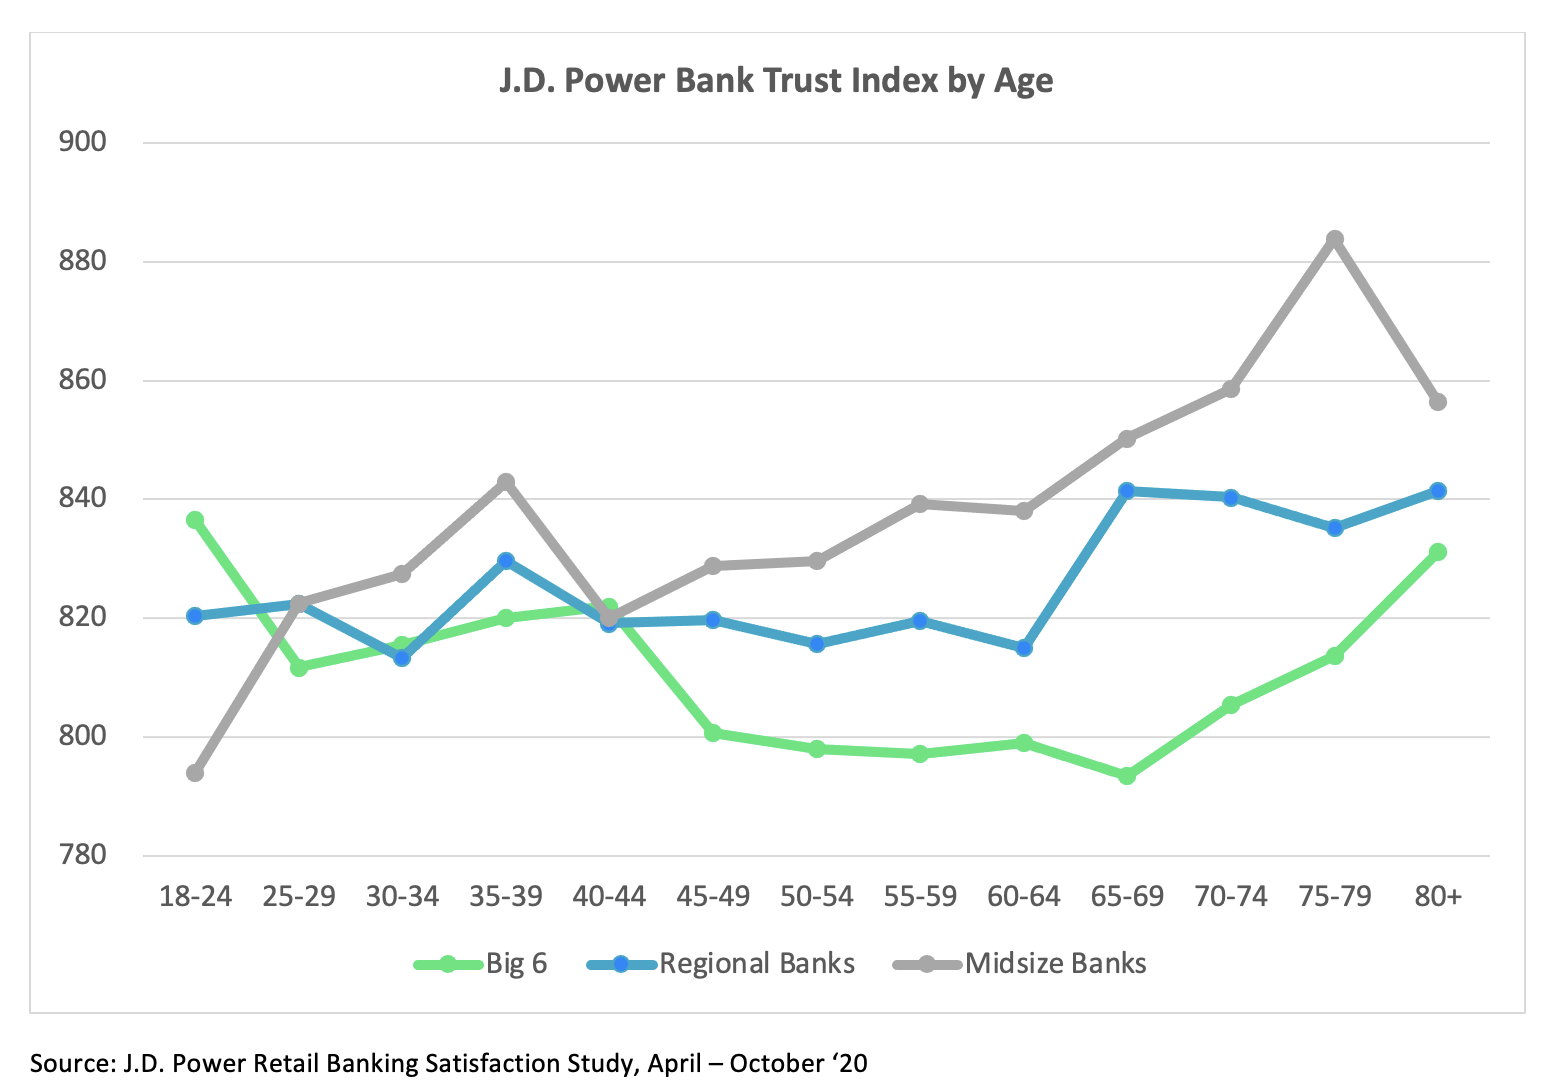 2021 US RBS Trust Index by Age